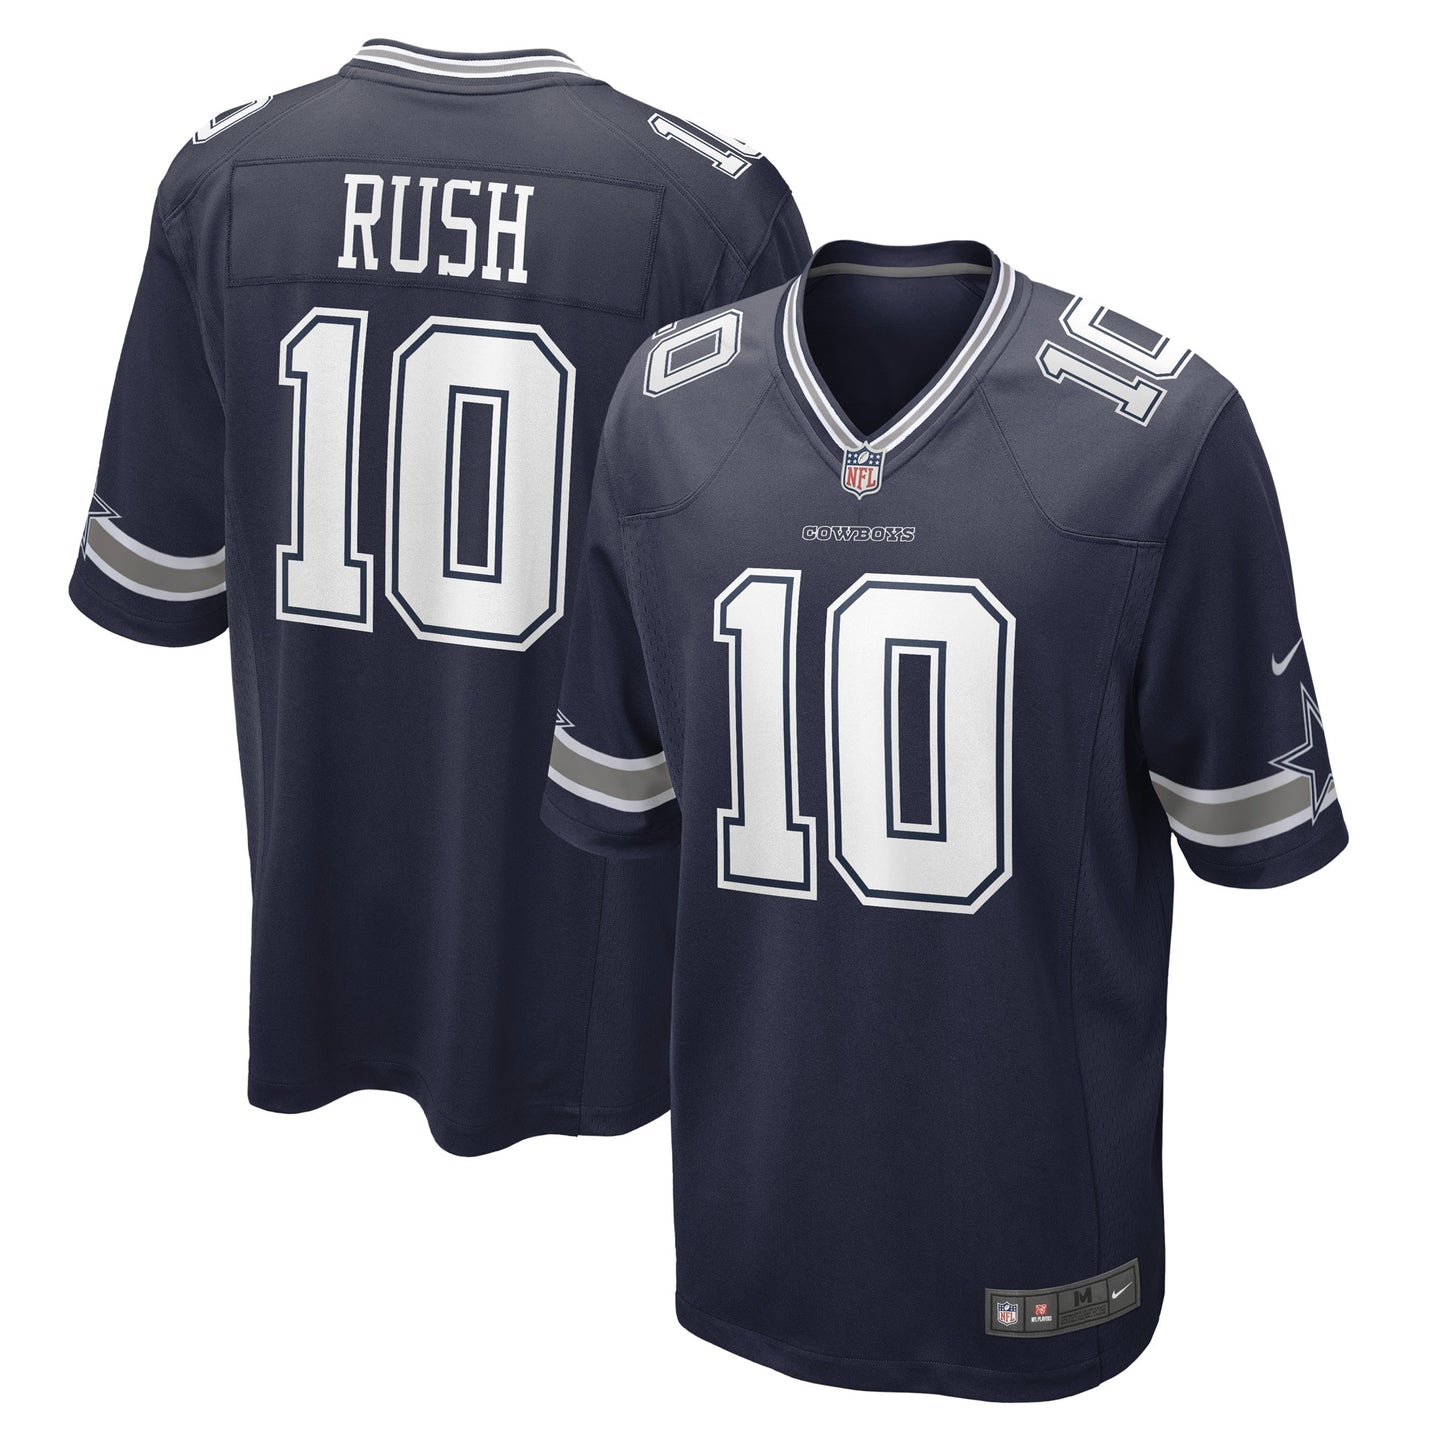 Cooper Rush Dallas Cowboys Nike Game Player Jersey - Navy